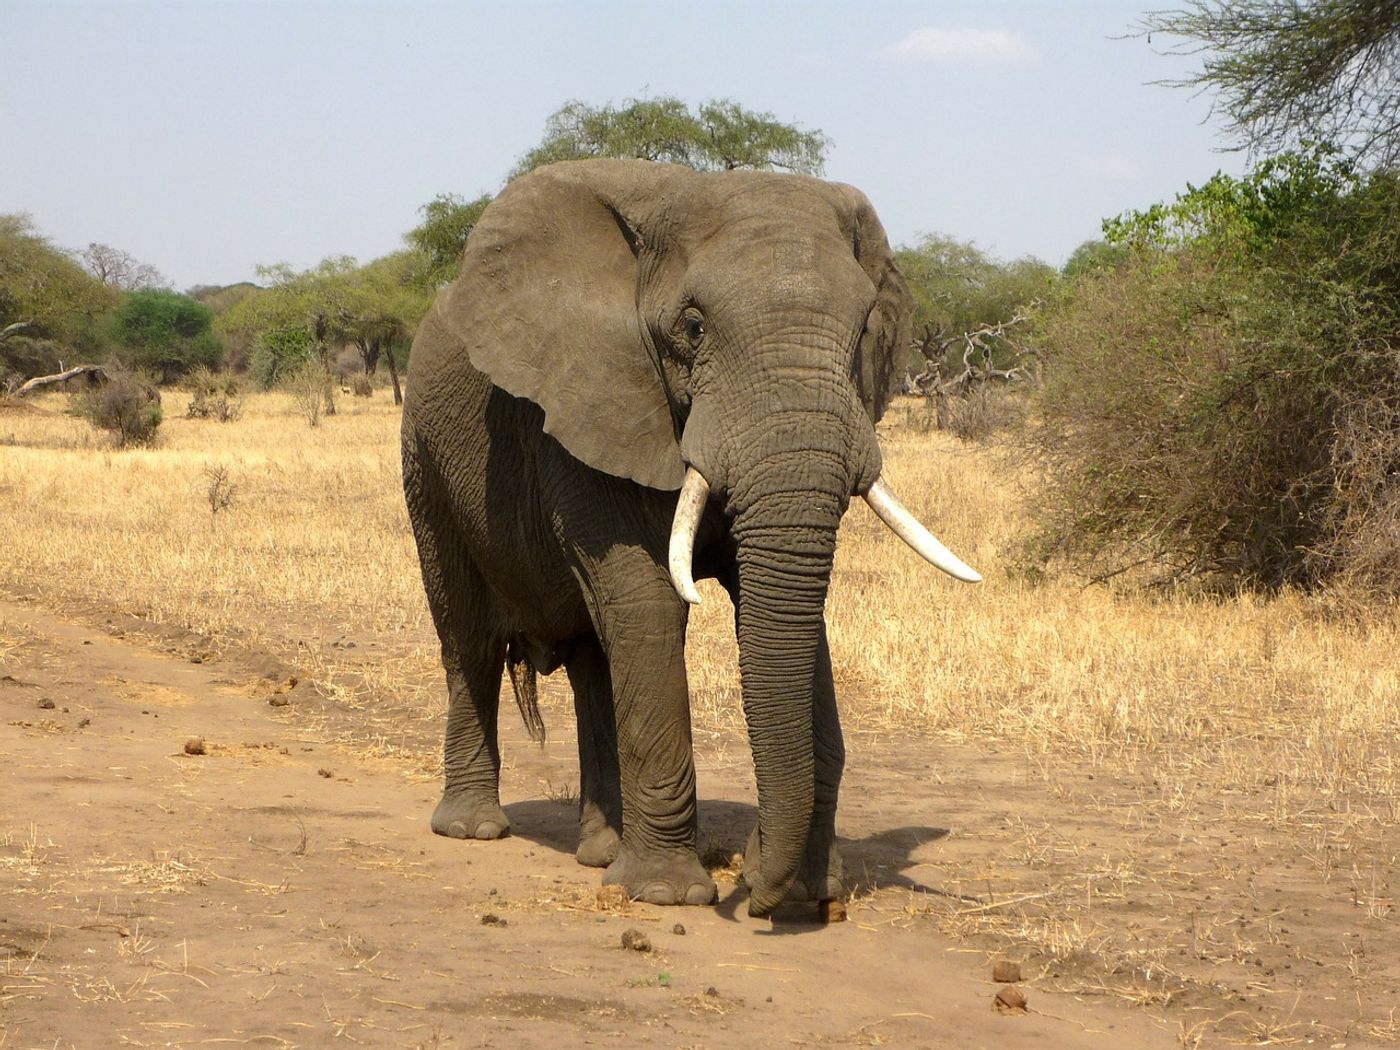 Elephants are commonly killed because their ivory tusks rake in big money on the black market.